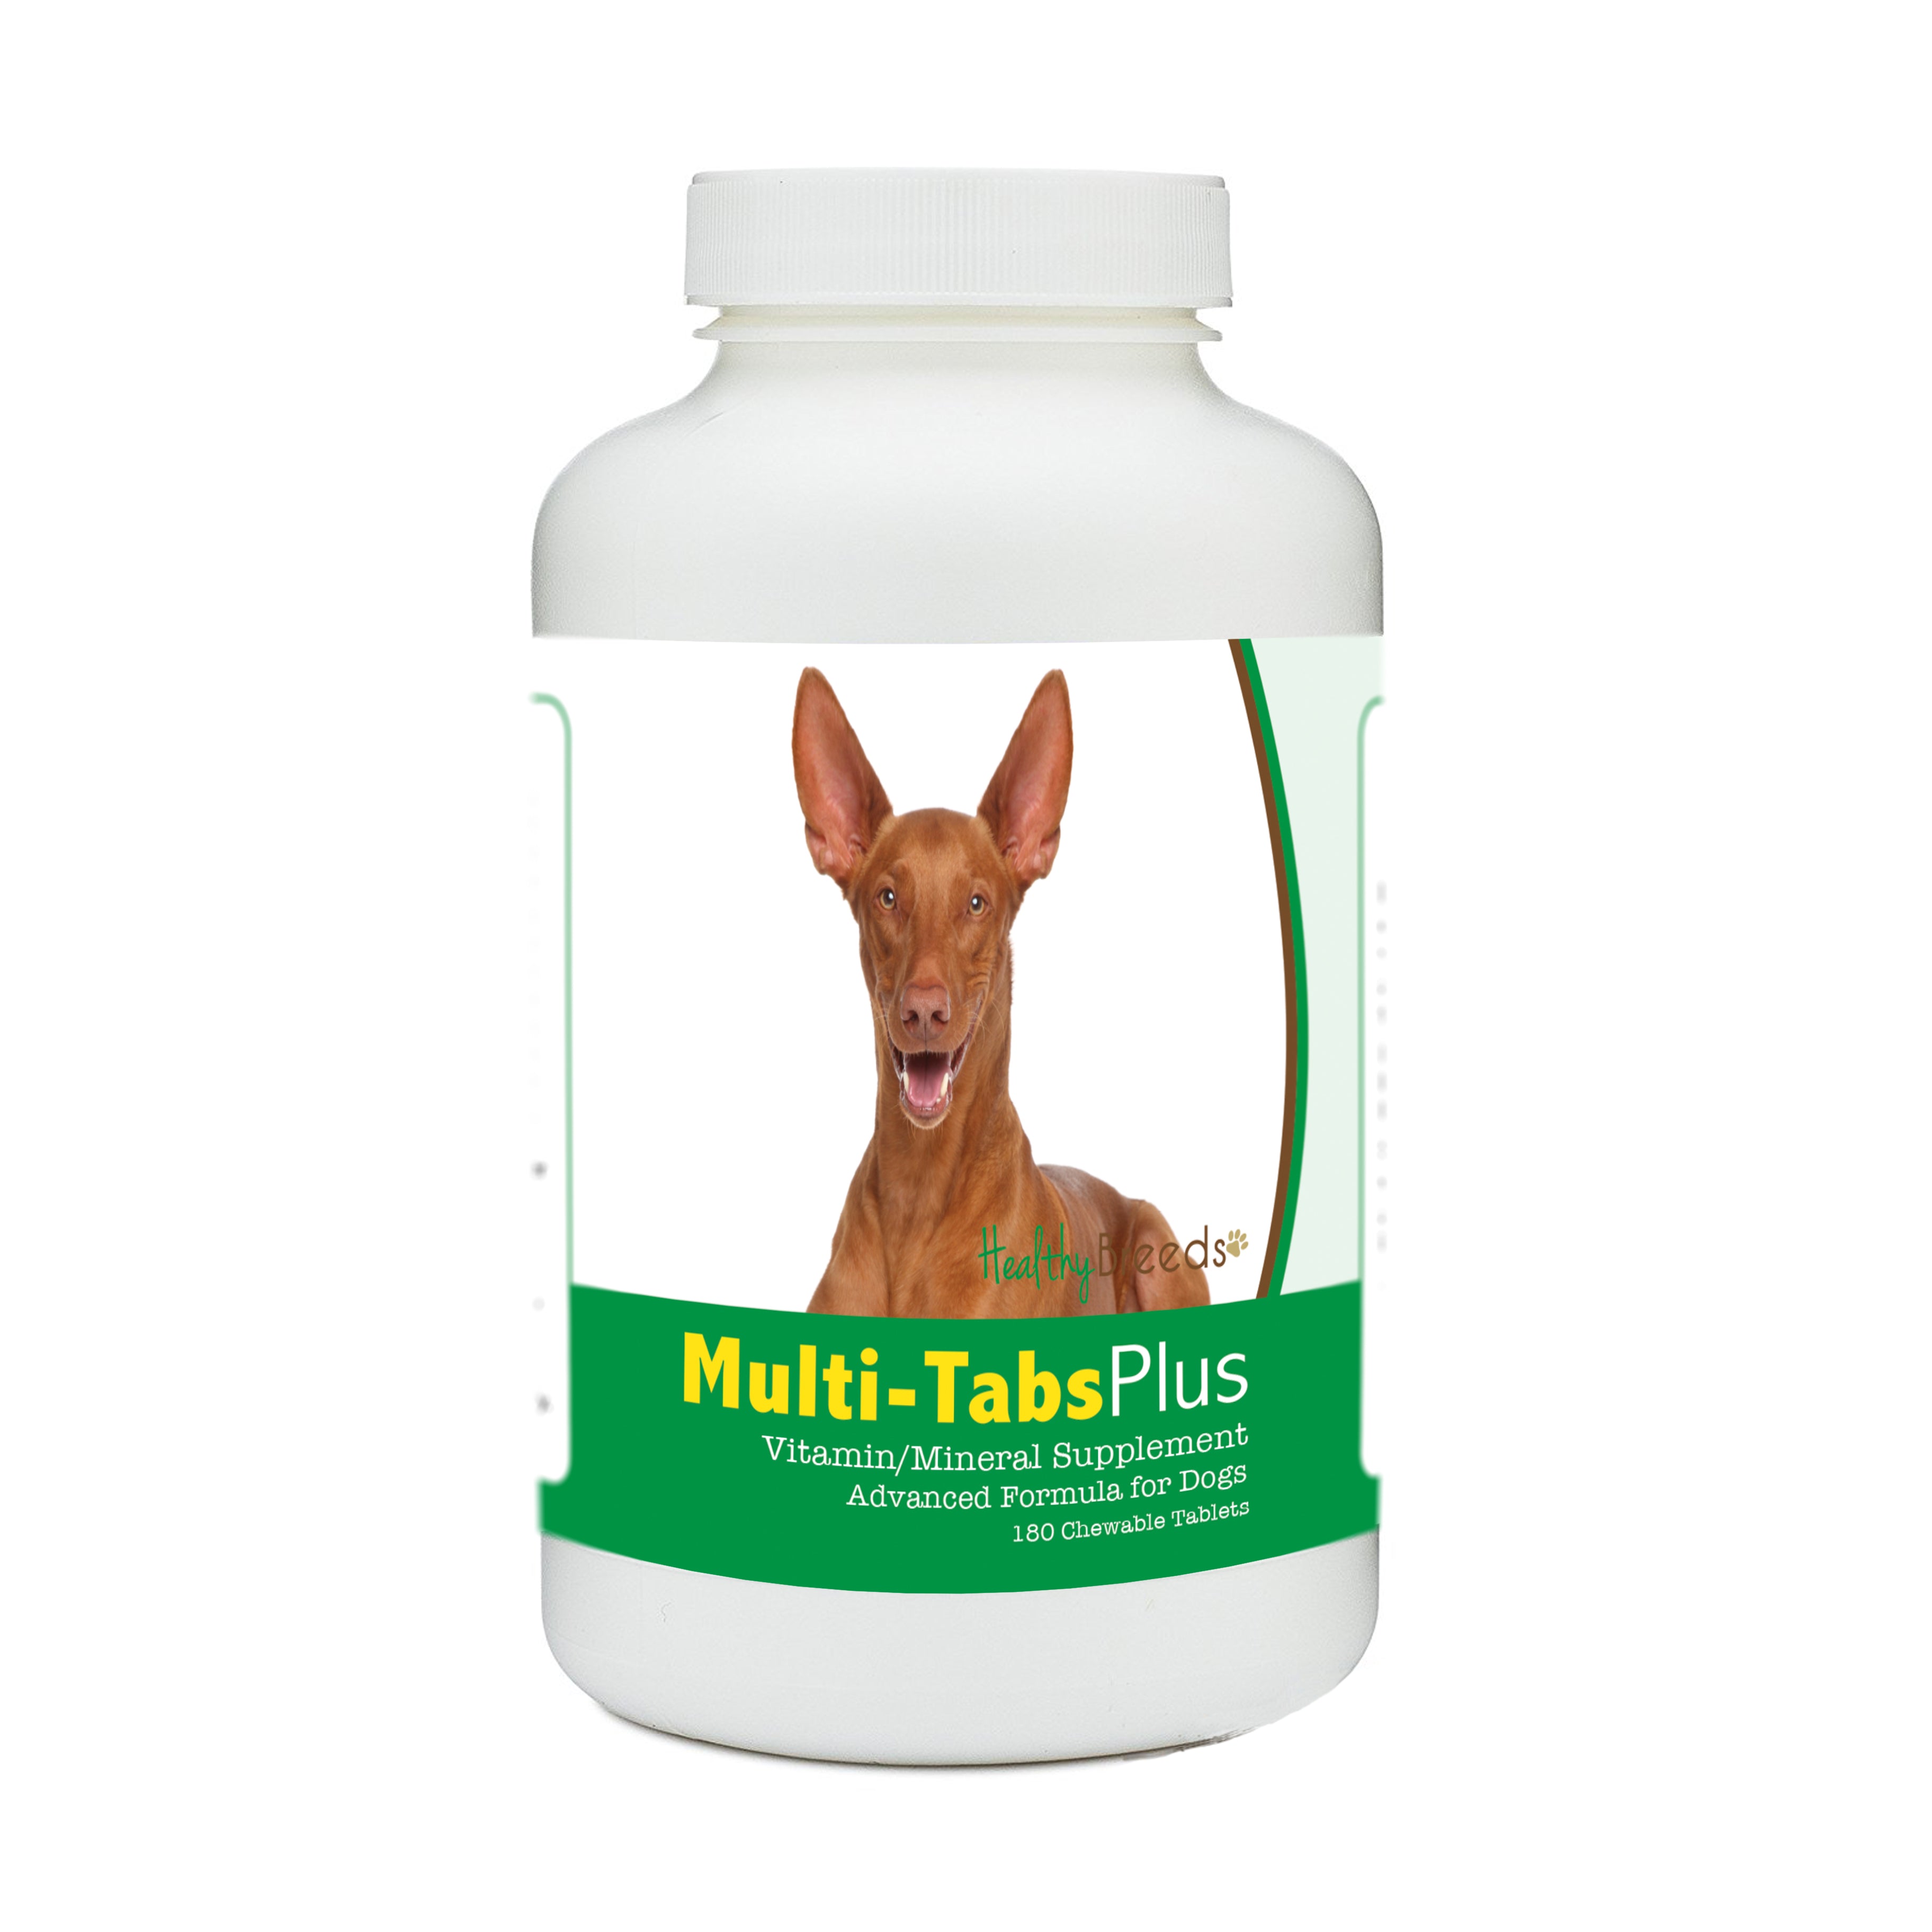 Pharaoh Hound Multi-Tabs Plus Chewable Tablets 180 Count